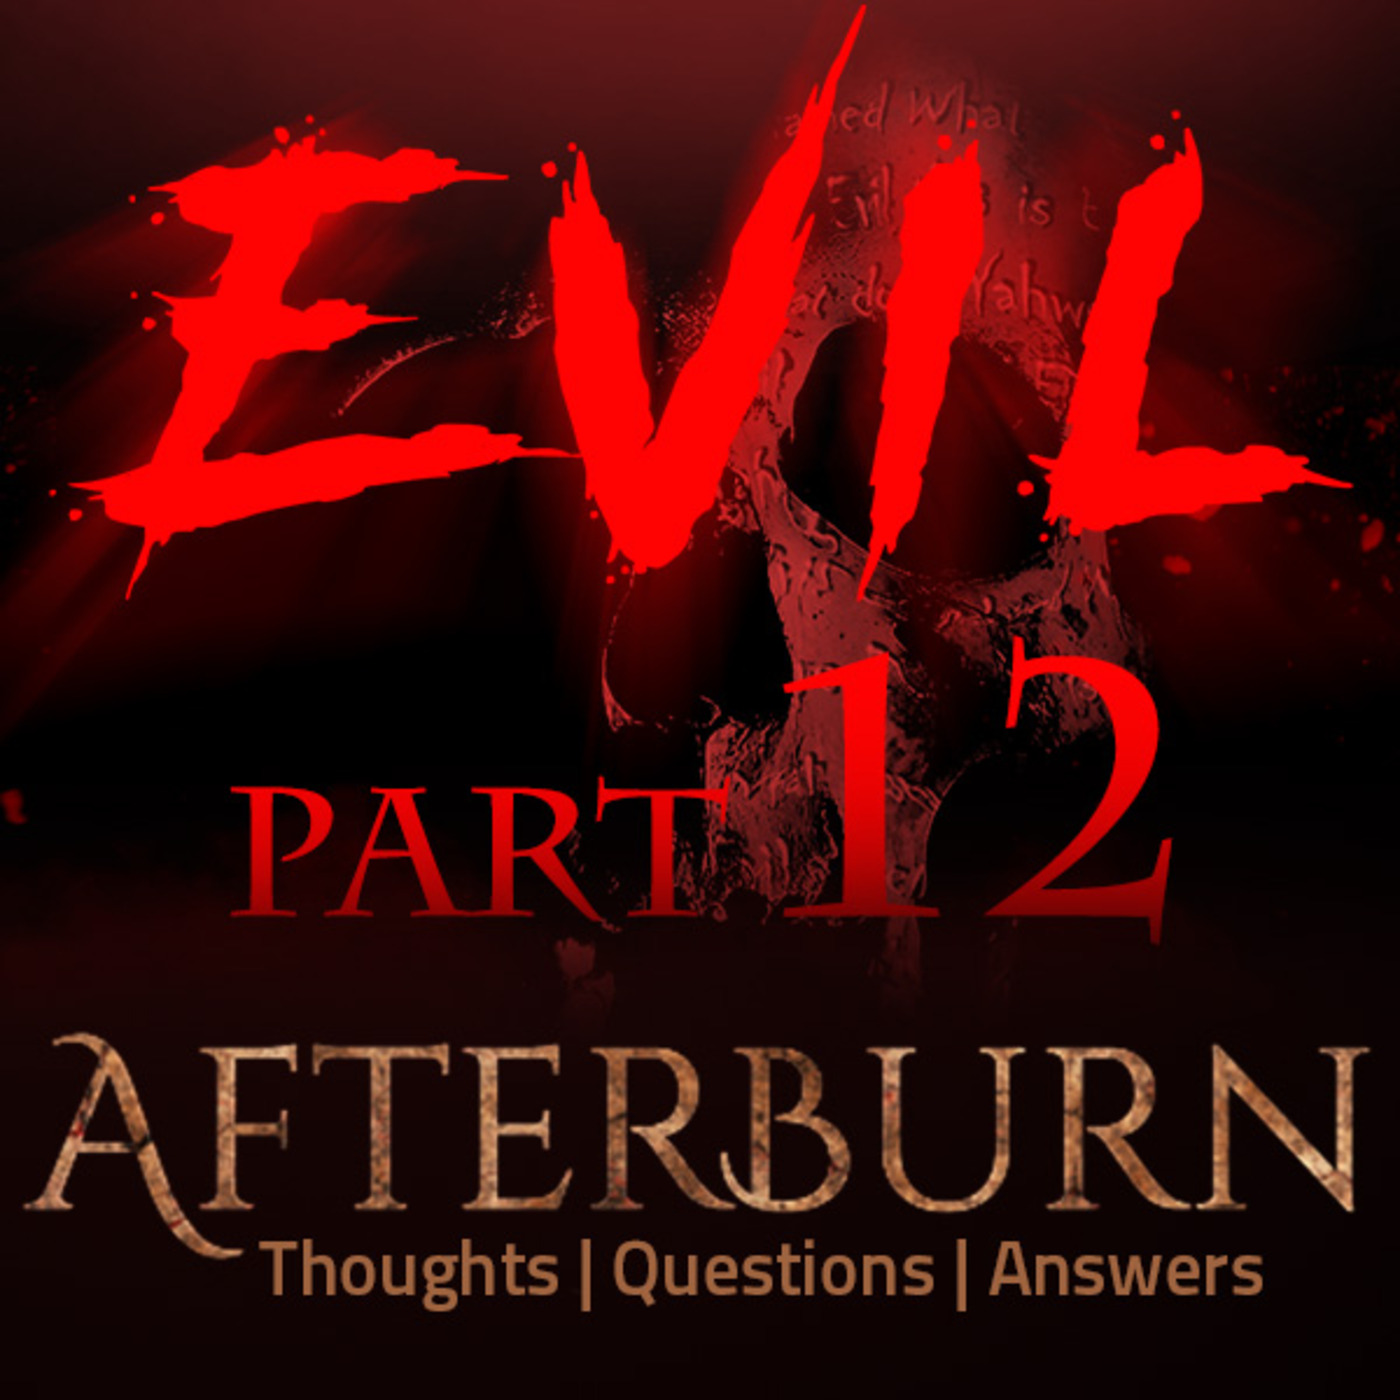 Episode 734: Afterburn | Thoughts, Q&A on Evil | Part 12